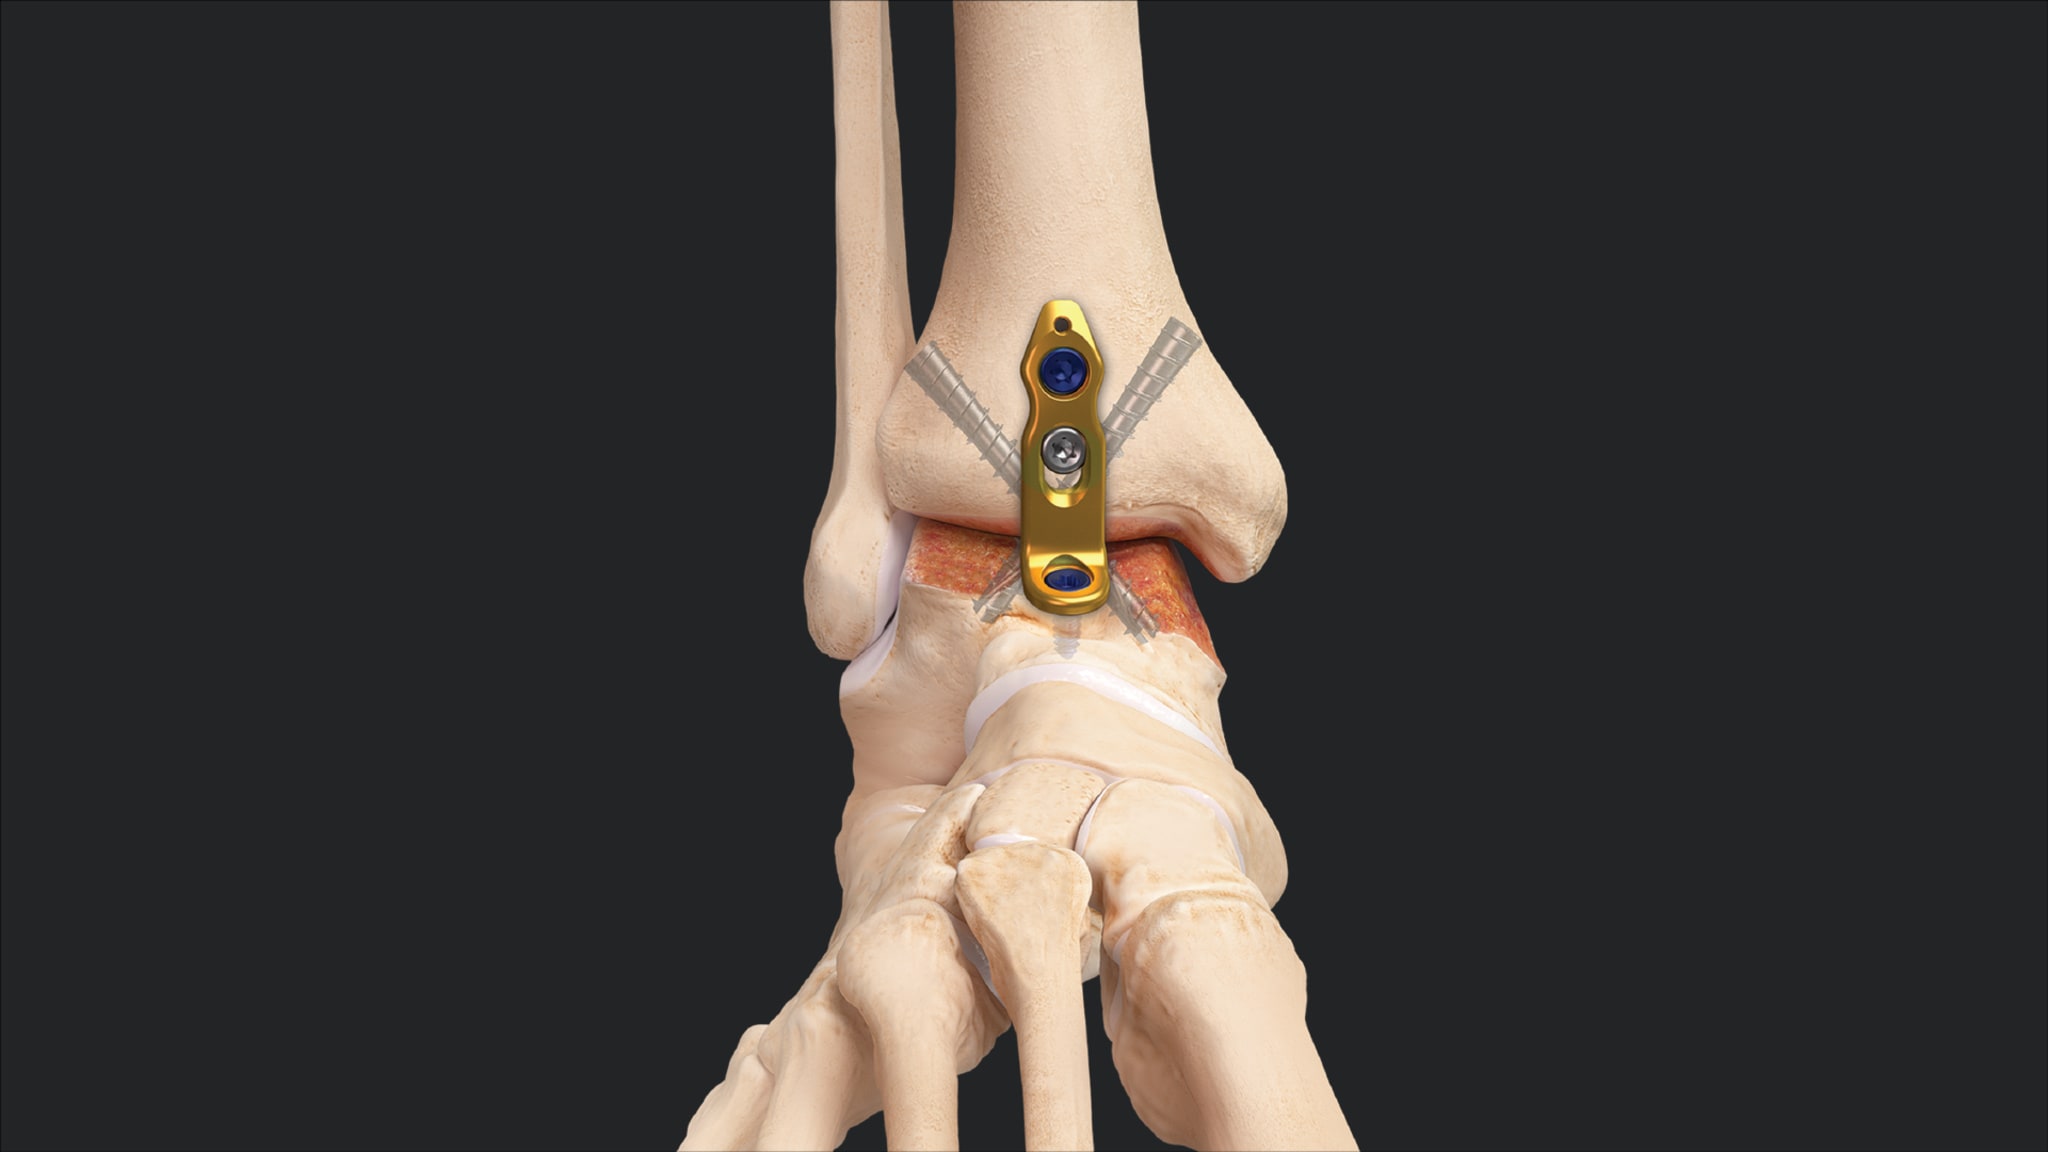 Plantar-Flexed Ankle Fusion Revision Using the Minimally Invasive Ankle Fusion Plate